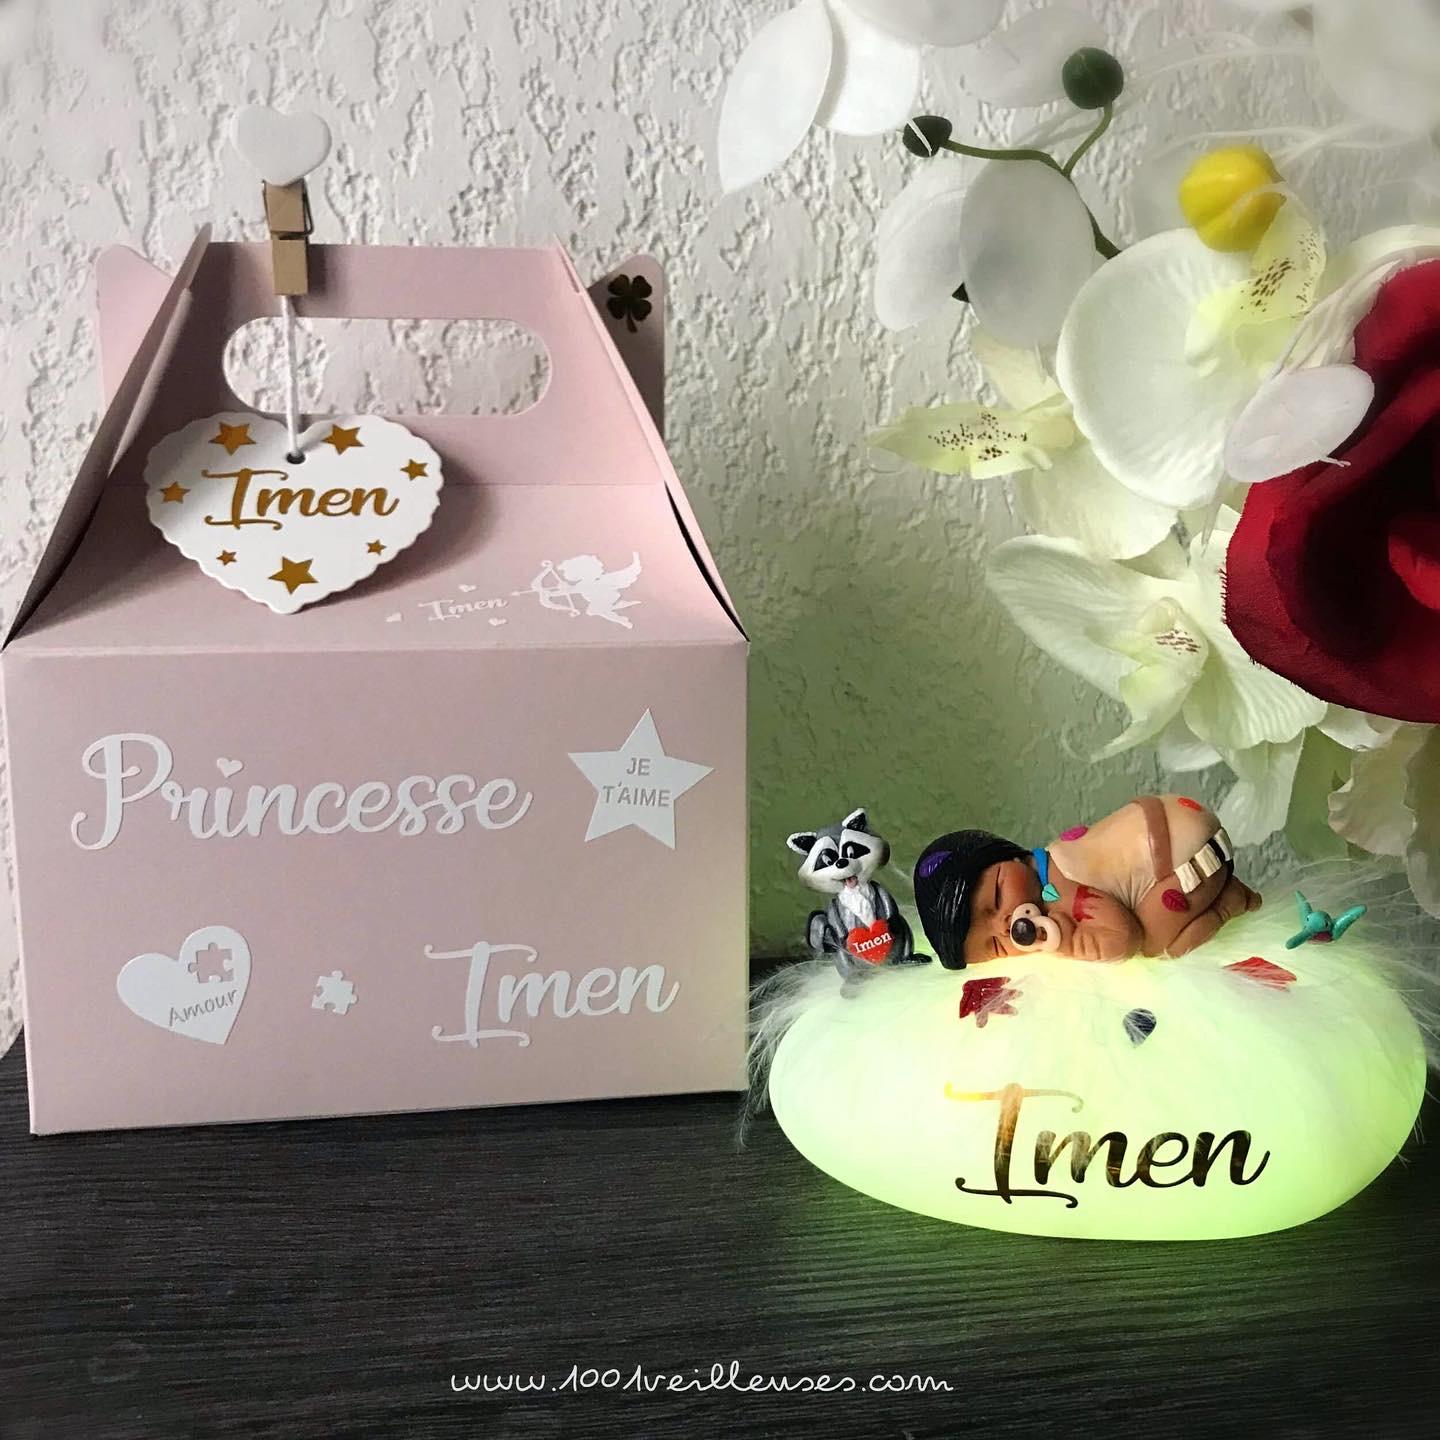 Custom nightlight in the shape of a glowing pebble with a baby girl in the Pocahontas theme, with a personalized gift box, front view